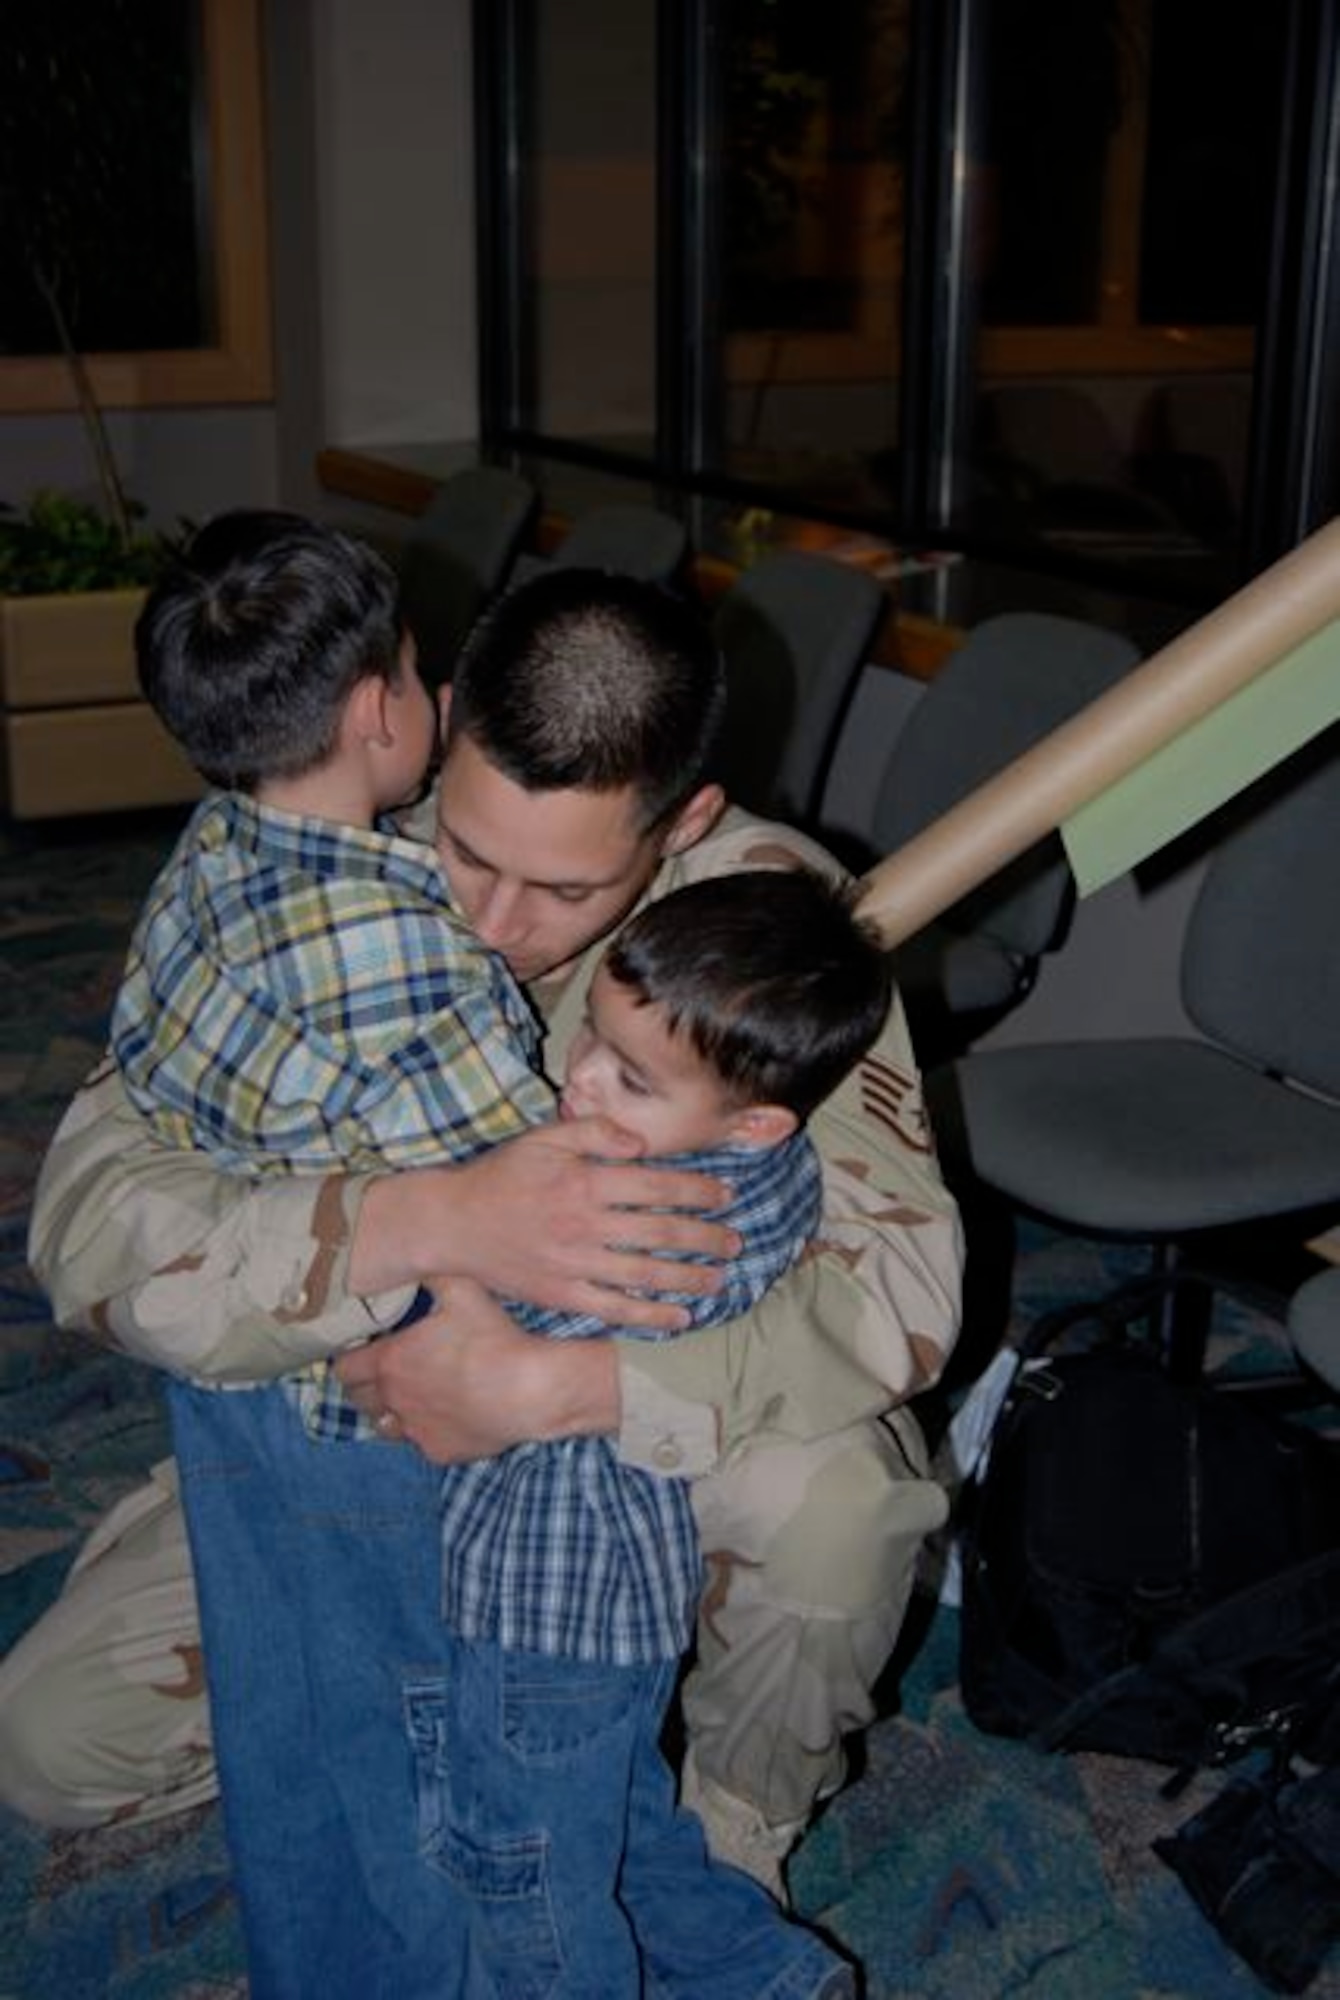 Staff Sgt. James Prim, 28th Civil Engineer Squadron, hugs his sons Diego and Robert, after returning Dec. 22 from a 7-month deployment to Contingency Operating Base Speicher, Iraq. Sergeant Prim was one of 42 28th CES Airmen deployed in support of the continuing global war on terrorism and responsible for maintaining base infrastructure in their overseas location. We left with a big sense of accomplishment, said Sergeant Prim. “I think we put a big dent in the workload, but there’s a lot of work to be done yet.”